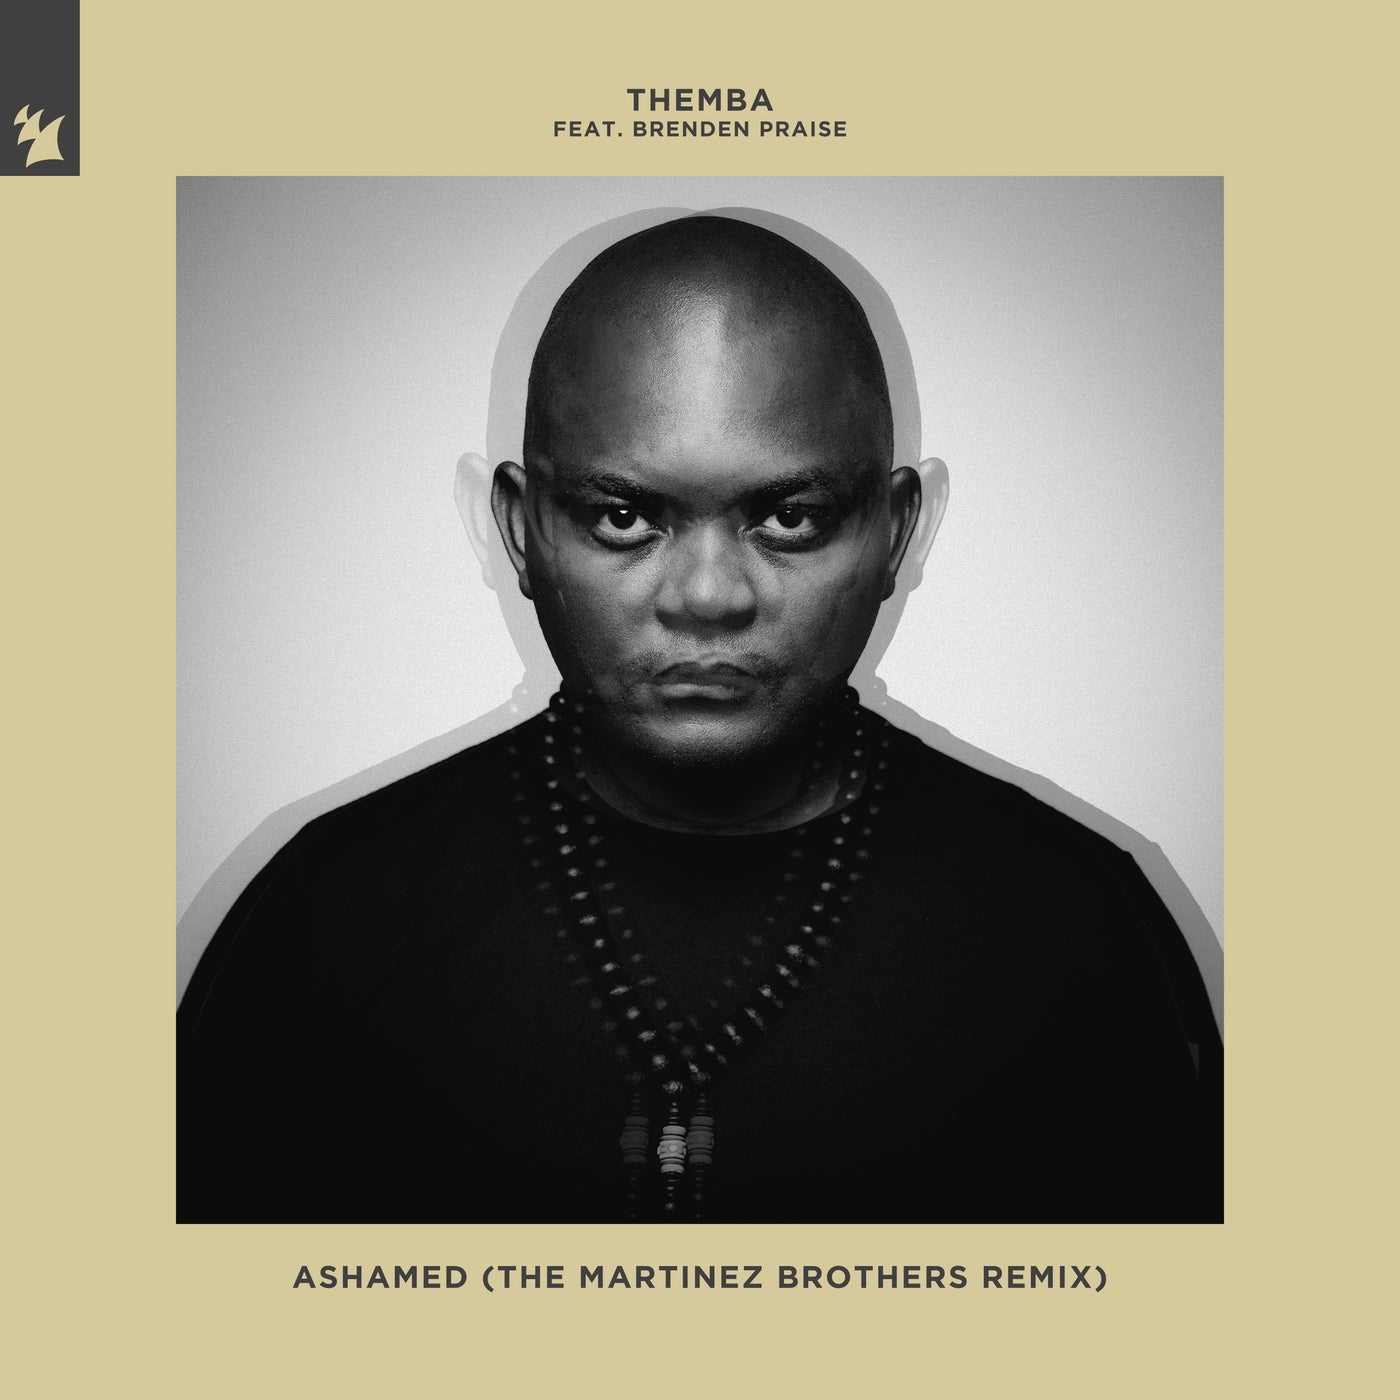 image cover: Brenden Praise, THEMBA (SA) - Ashamed - The Martinez Brothers Remix / ARMAS1927